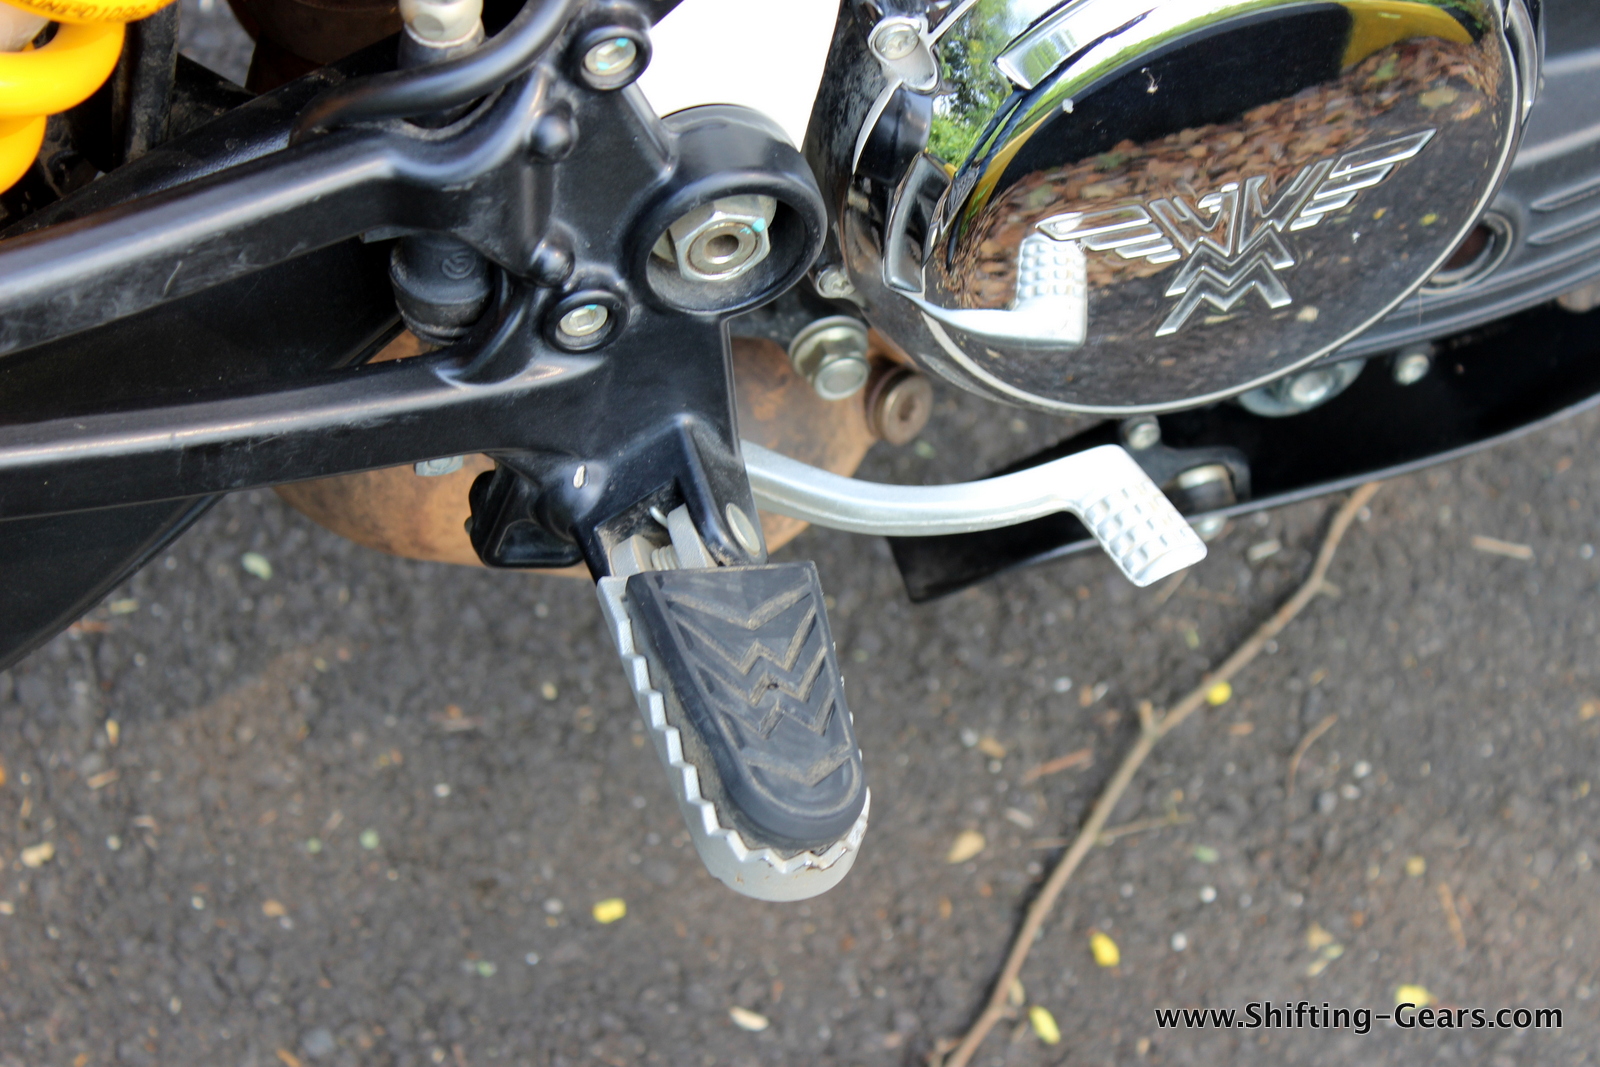 Brake lever falls right in place